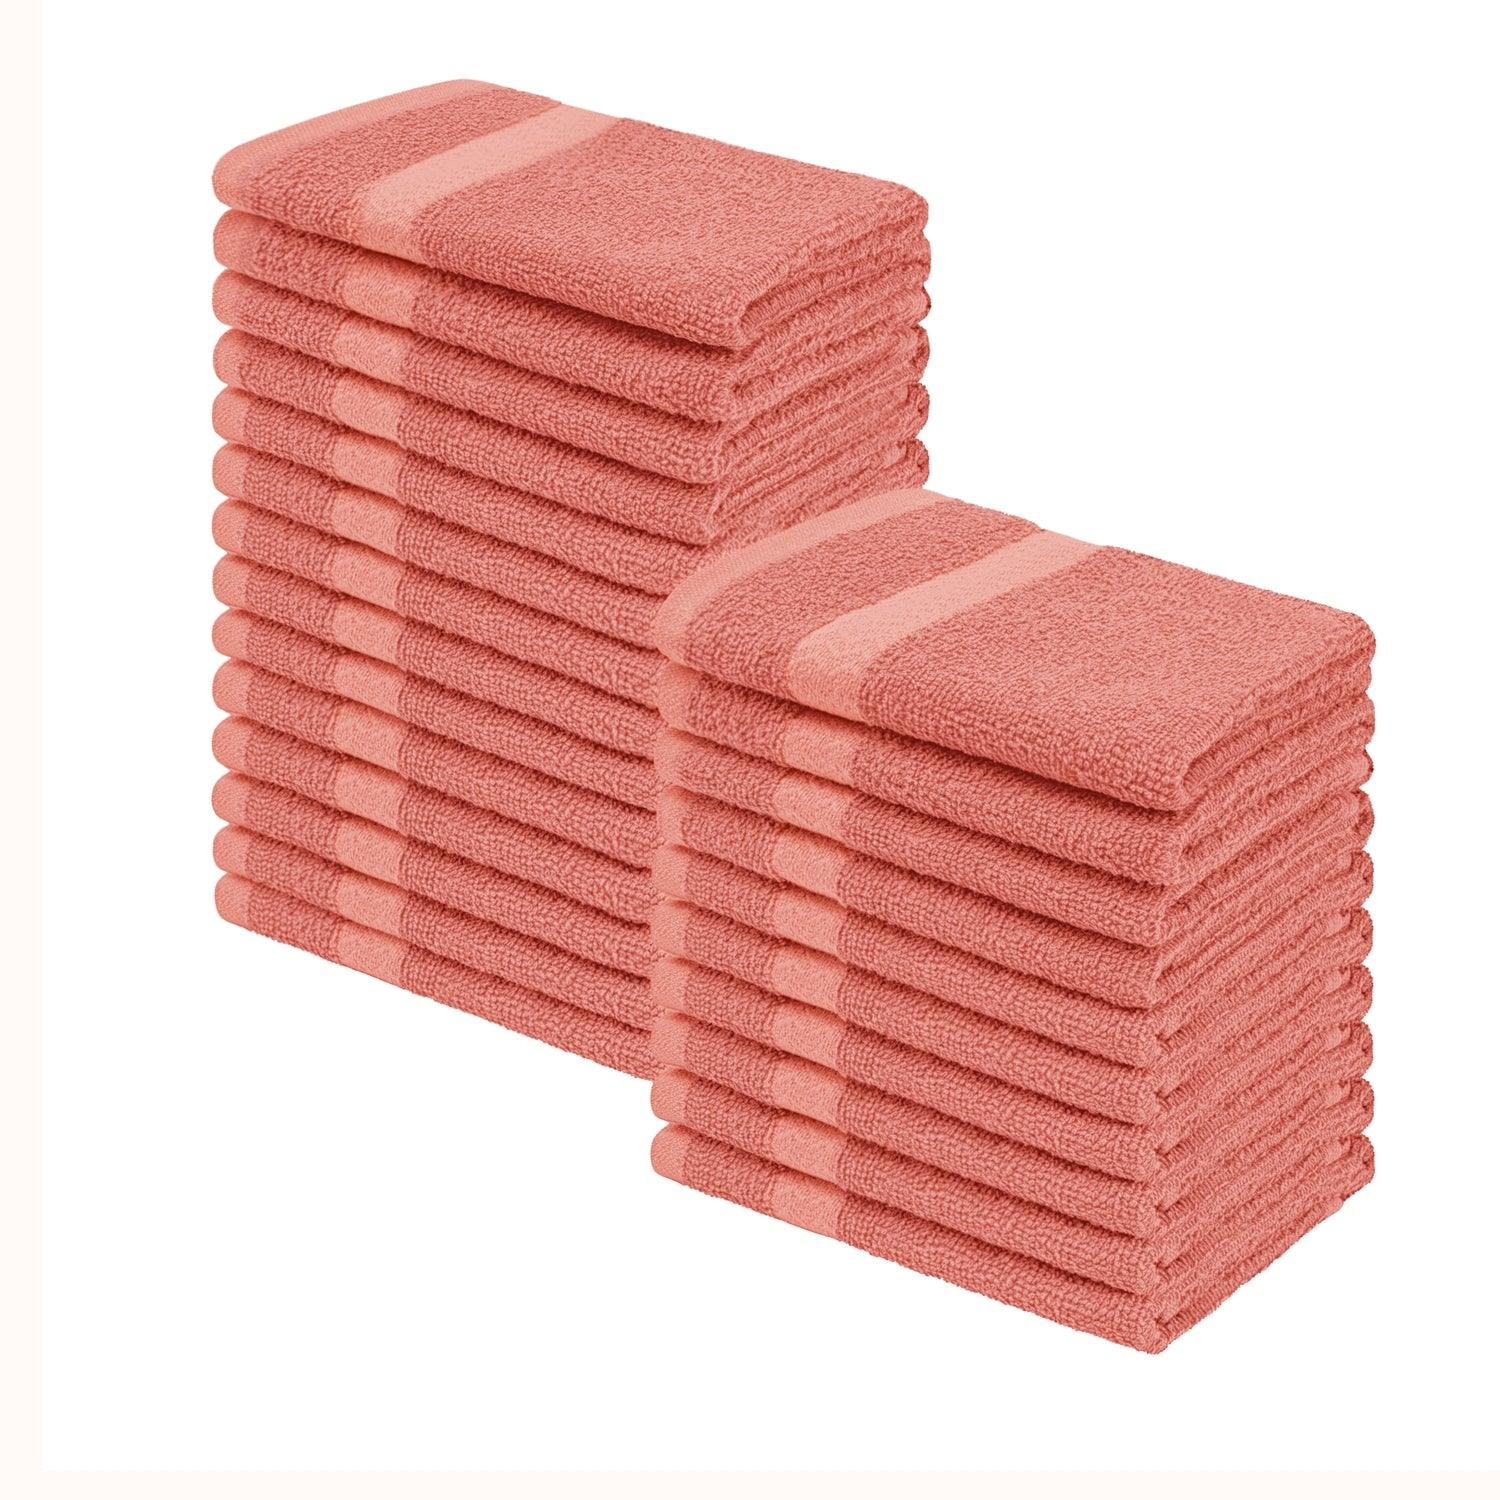 Eco-Friendly Cotton Highly Absorbent 24-Piece Washcloth Set - Coral